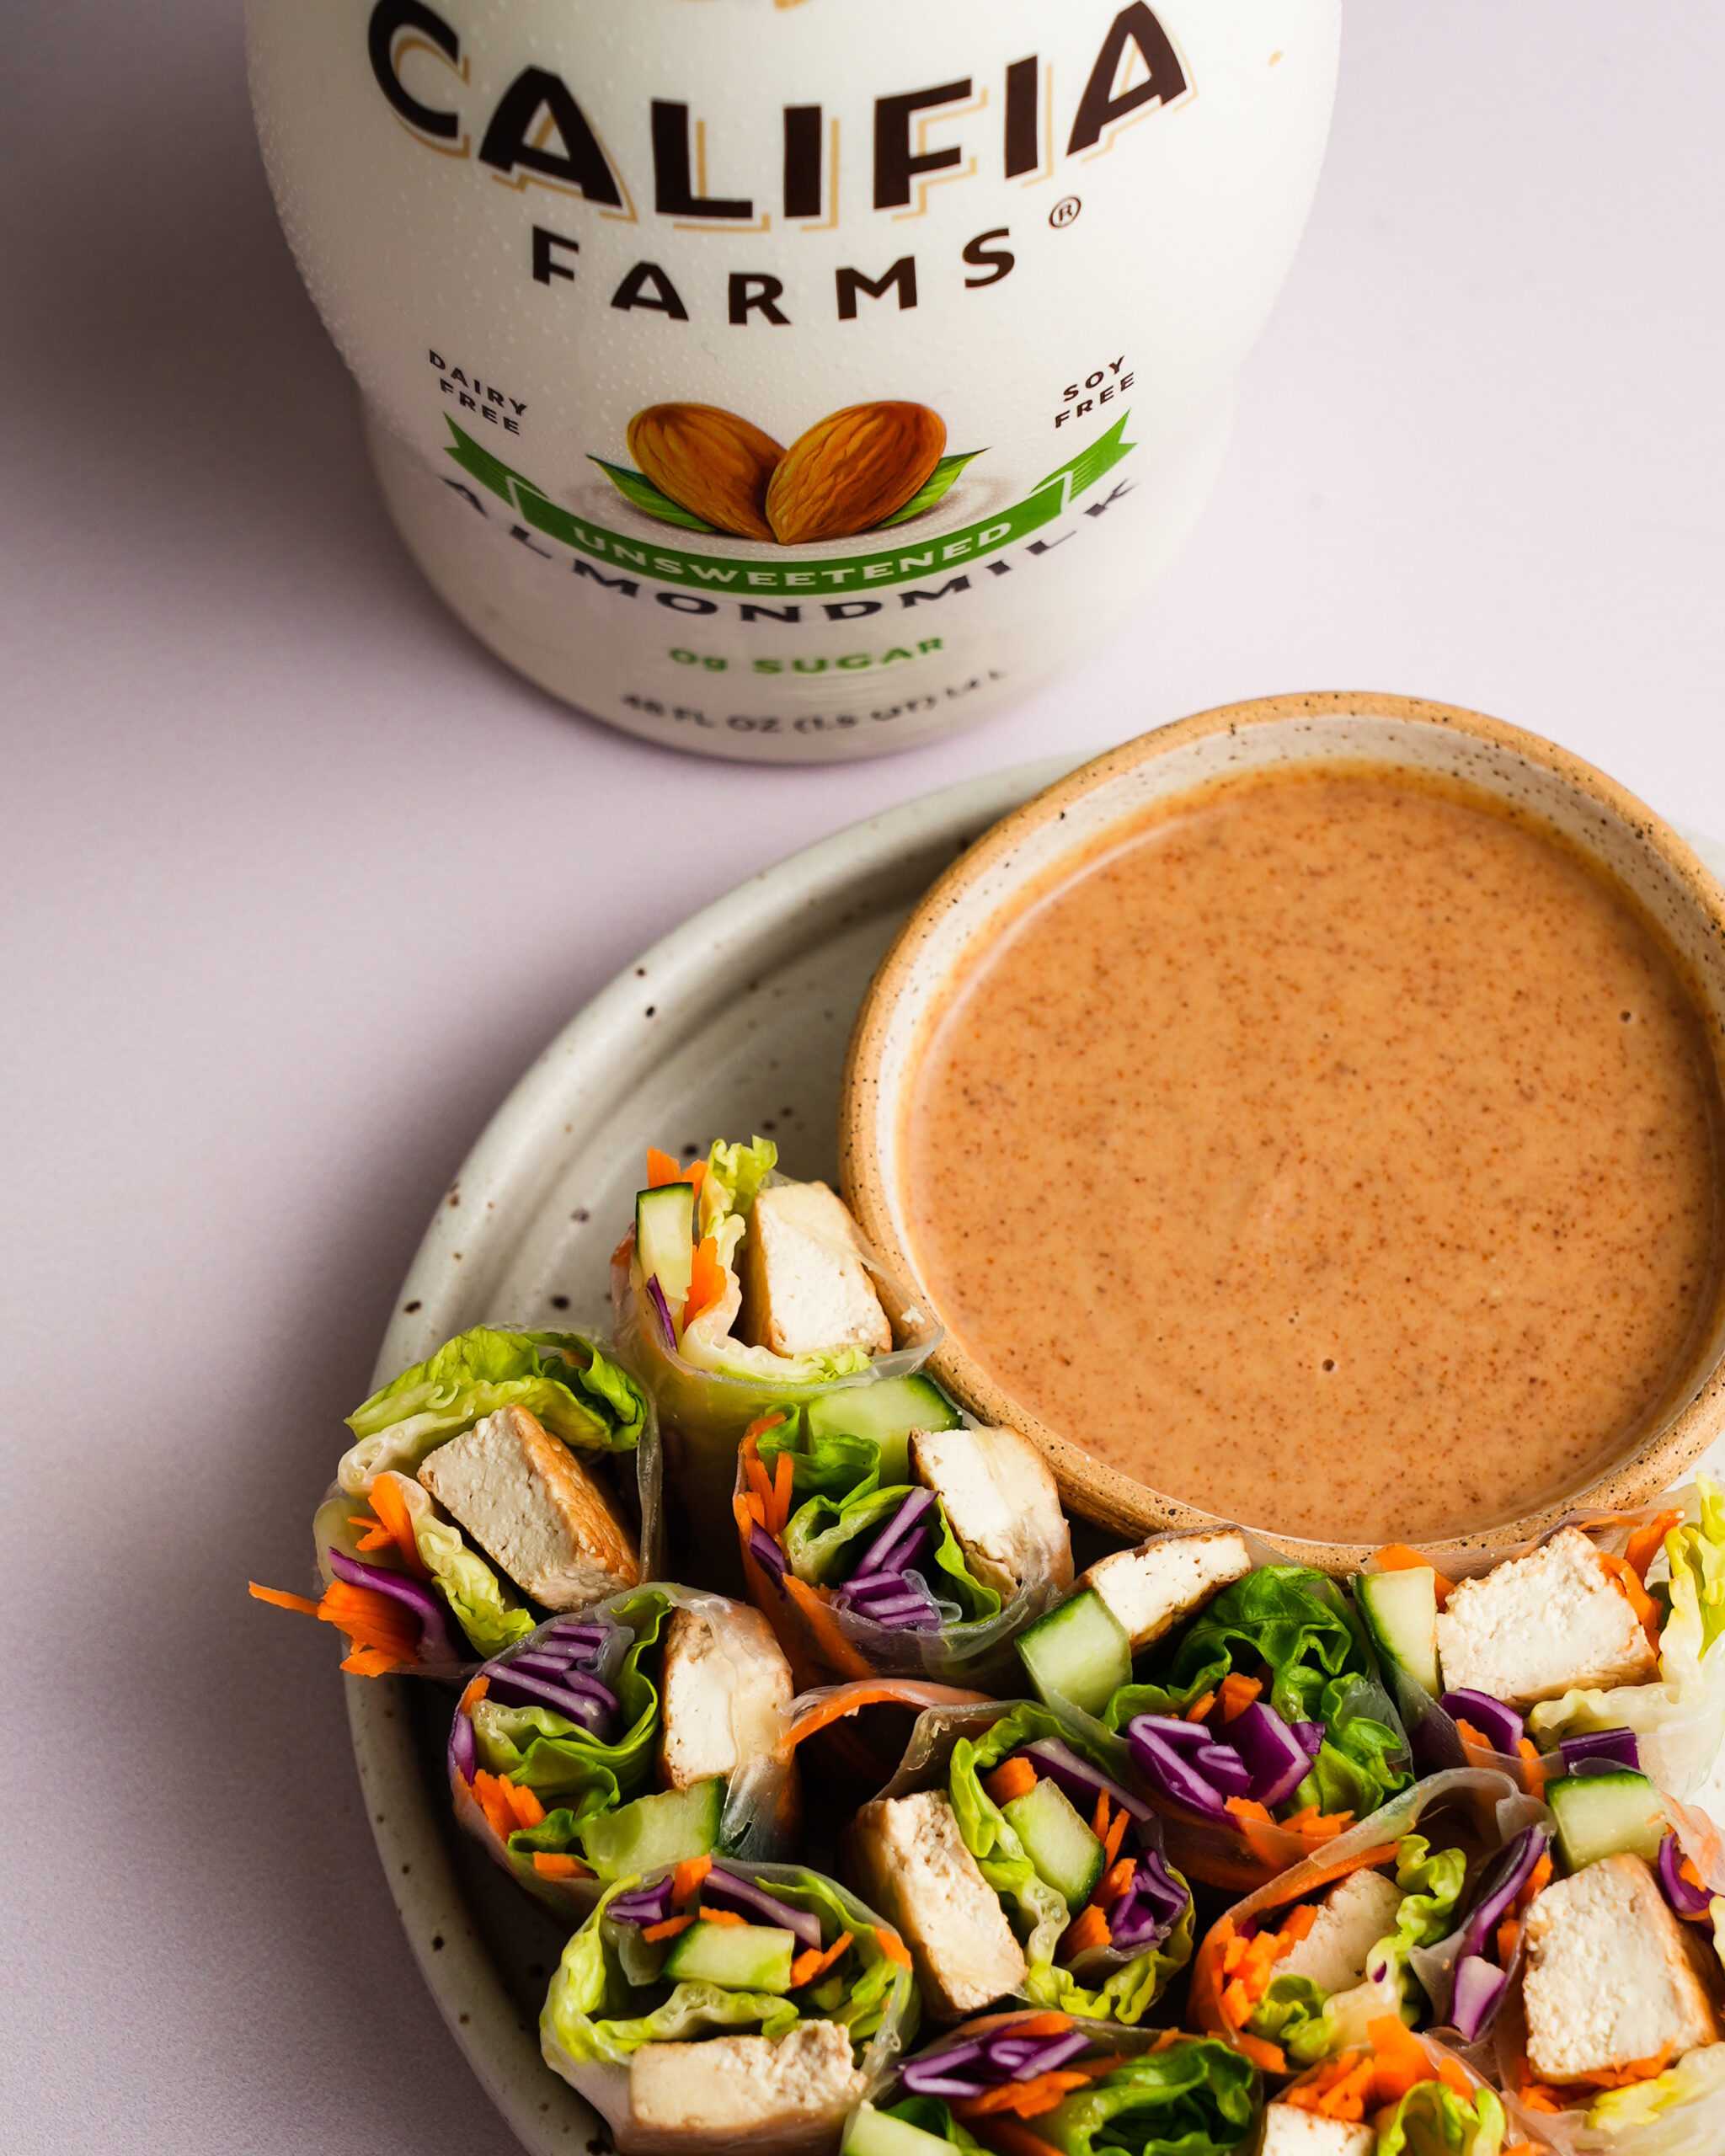 Bright colored vegetable spring rolls sit in the center of the image with almond butter dipping sauce in a separate container. Califia Farms Unsweetened Almondmilk sits in the back of the image.